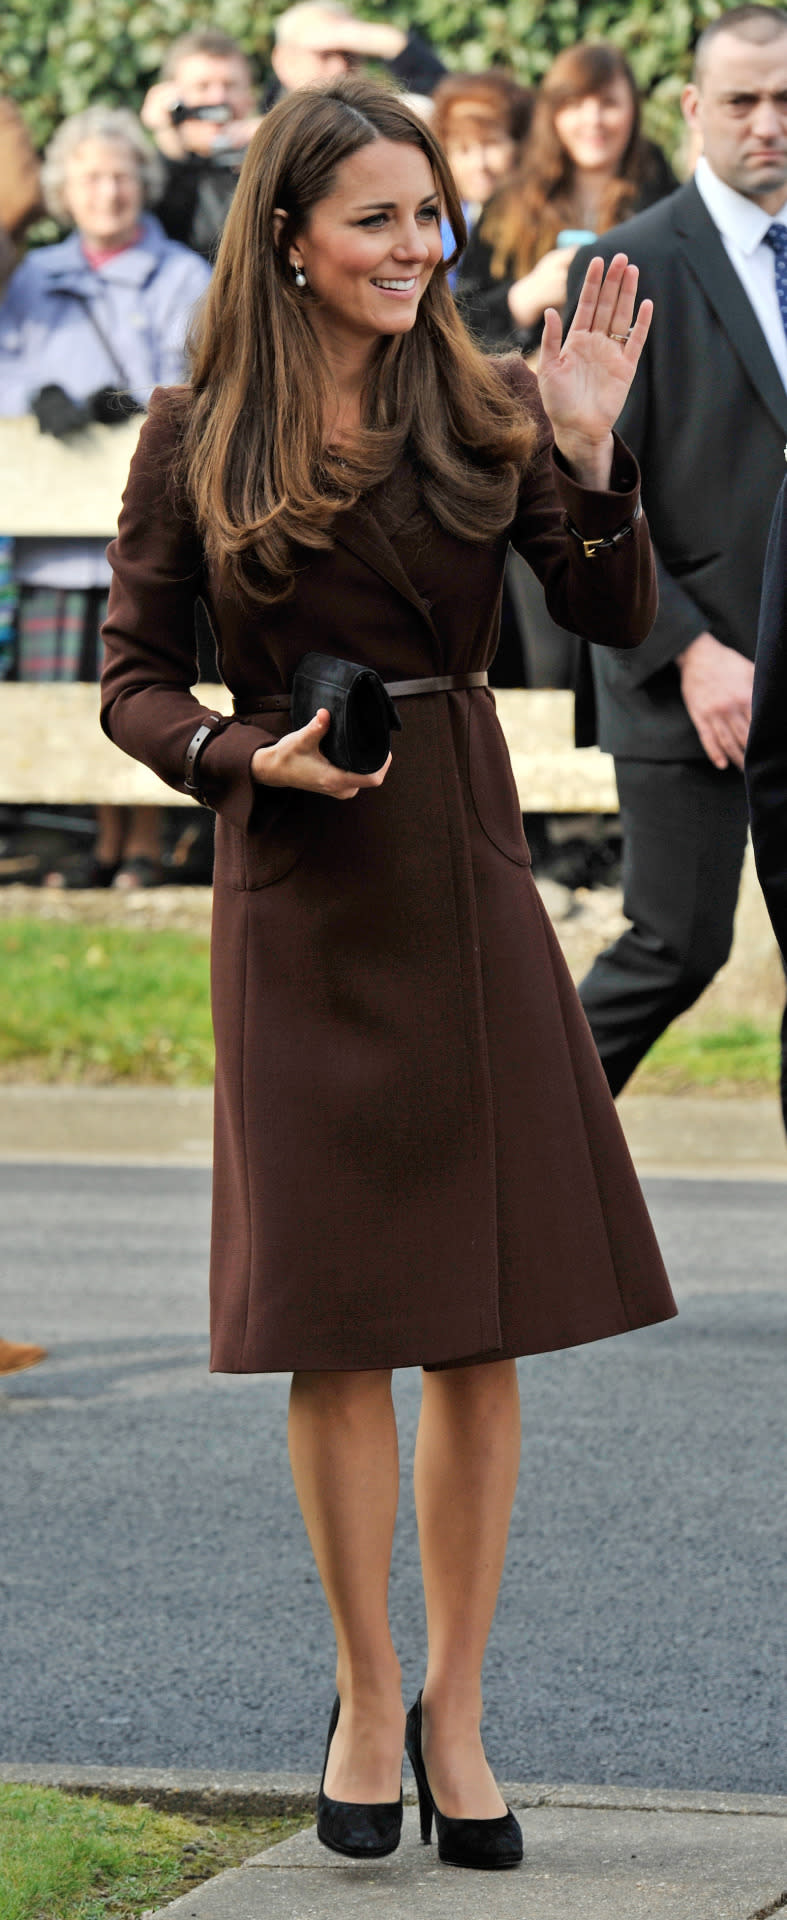 <p>Kate visited Grimsby in a chic brown Hobbs coat teamed with a black suede clutch and matching heels.</p><p><i>[Photo: PA]</i></p>